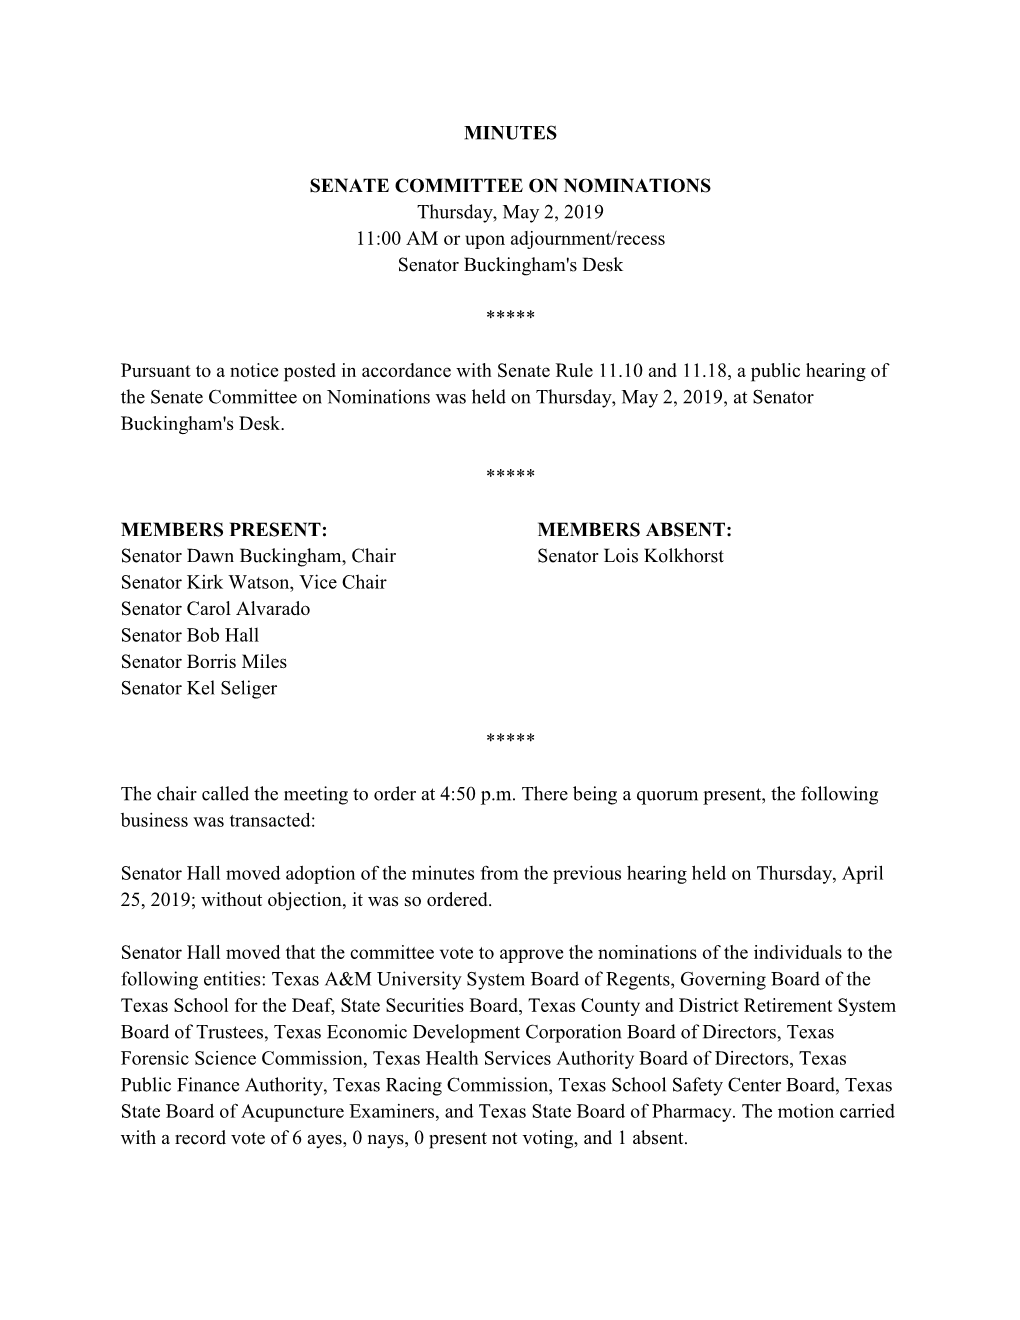 MINUTES SENATE COMMITTEE on NOMINATIONS Thursday, May 2